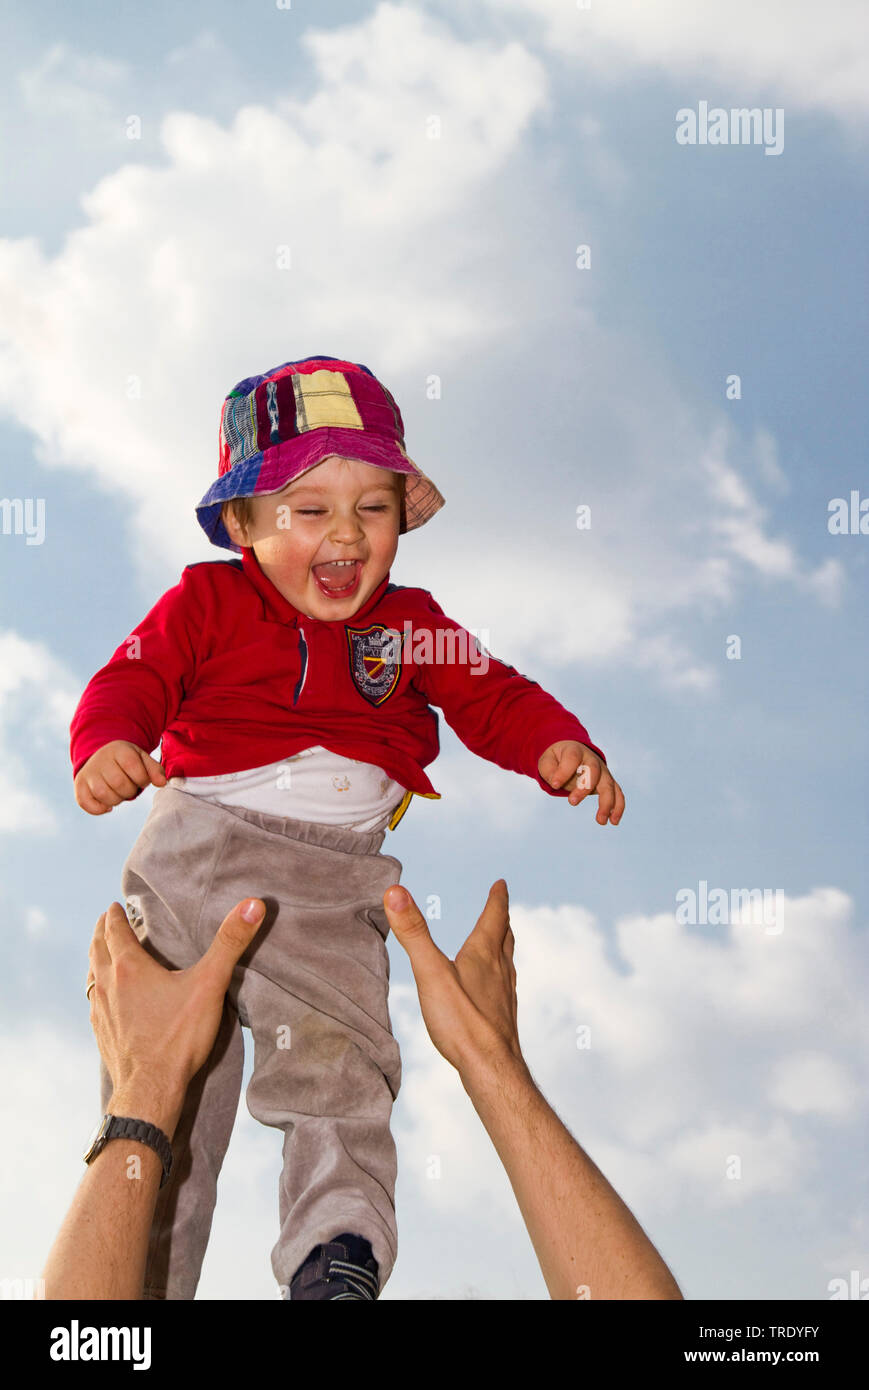 Portrait of a young boy thrown up into the air by an adult Stock Photo